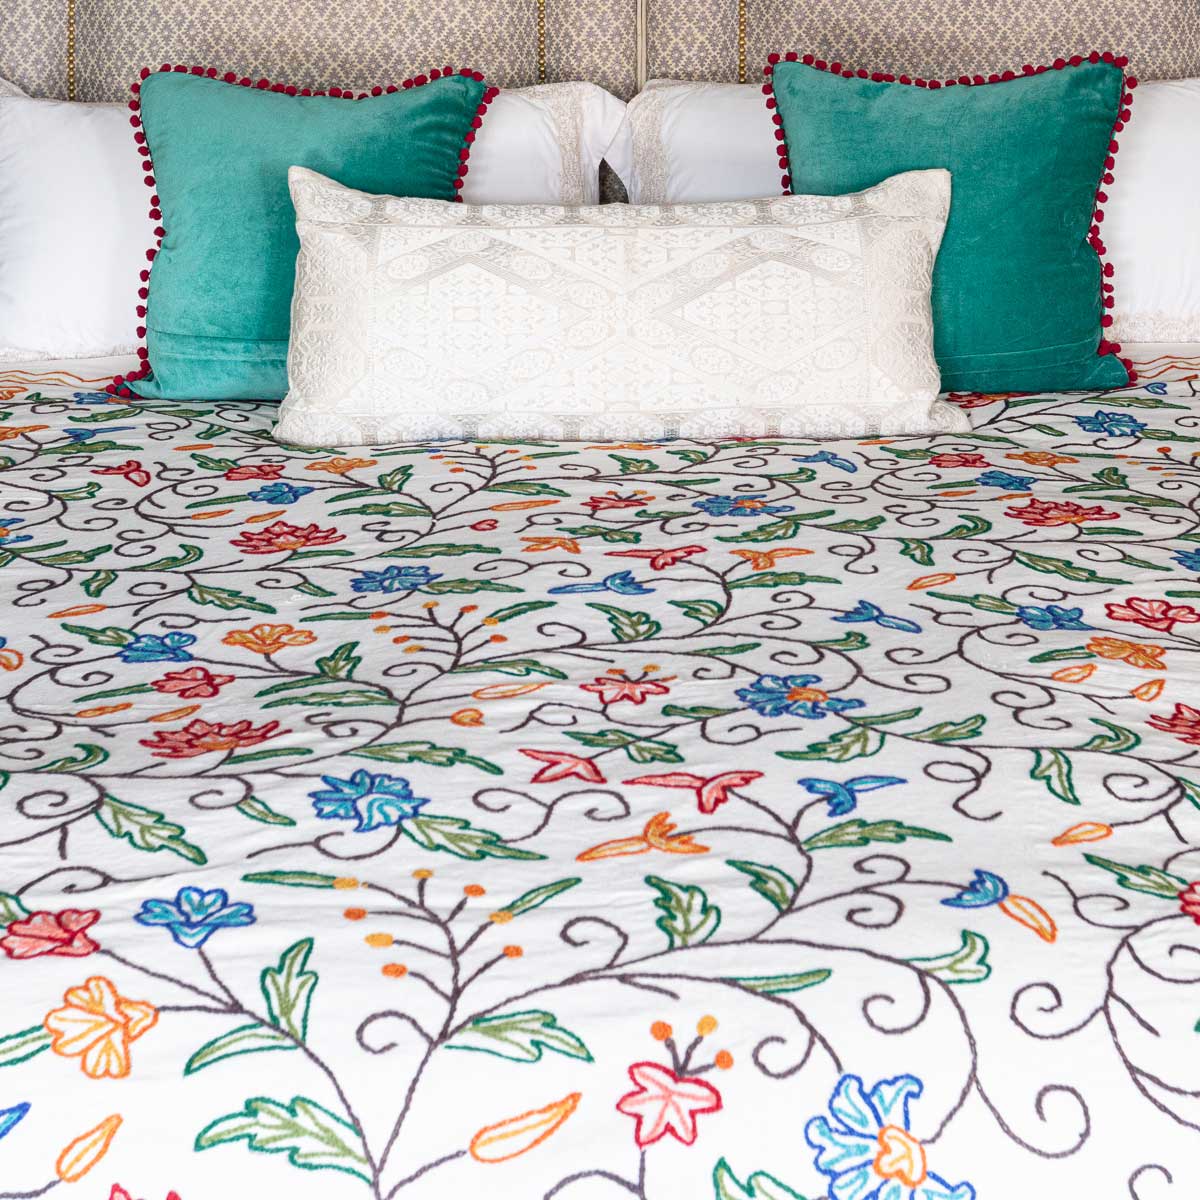 CHINAR Crewel Embroidered Bedspread